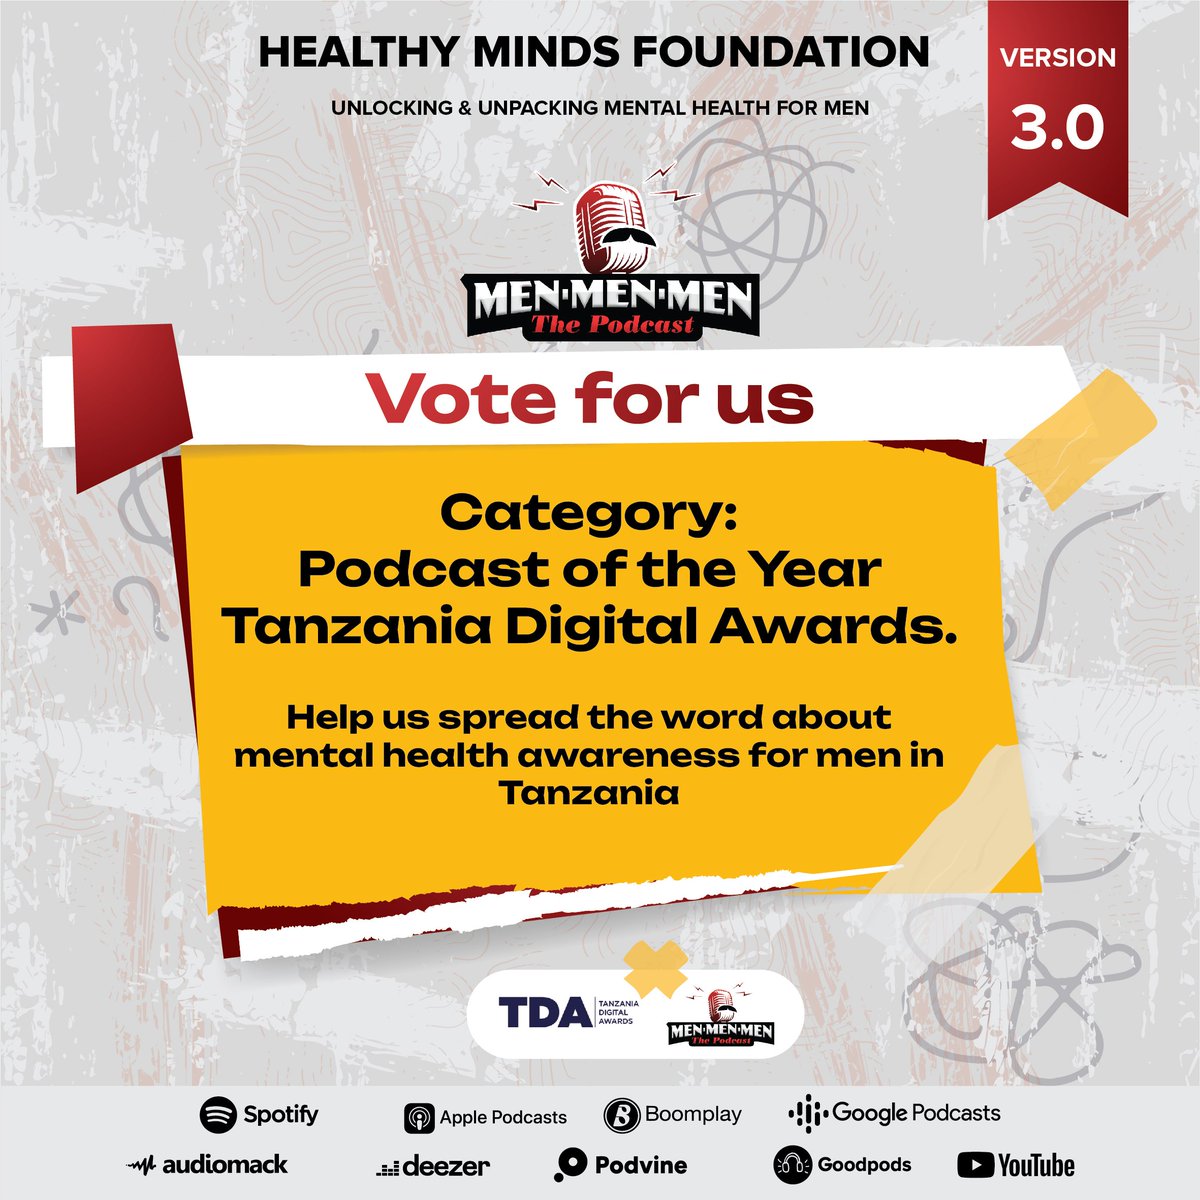 We’re thrilled to announce that our podcast, has been nominated for the Podcast of the Year award at the @digitalawardstz digitalawards.co.tz This award would mean the world to us, as it would amplify our mission to spread awareness about mental health for men.